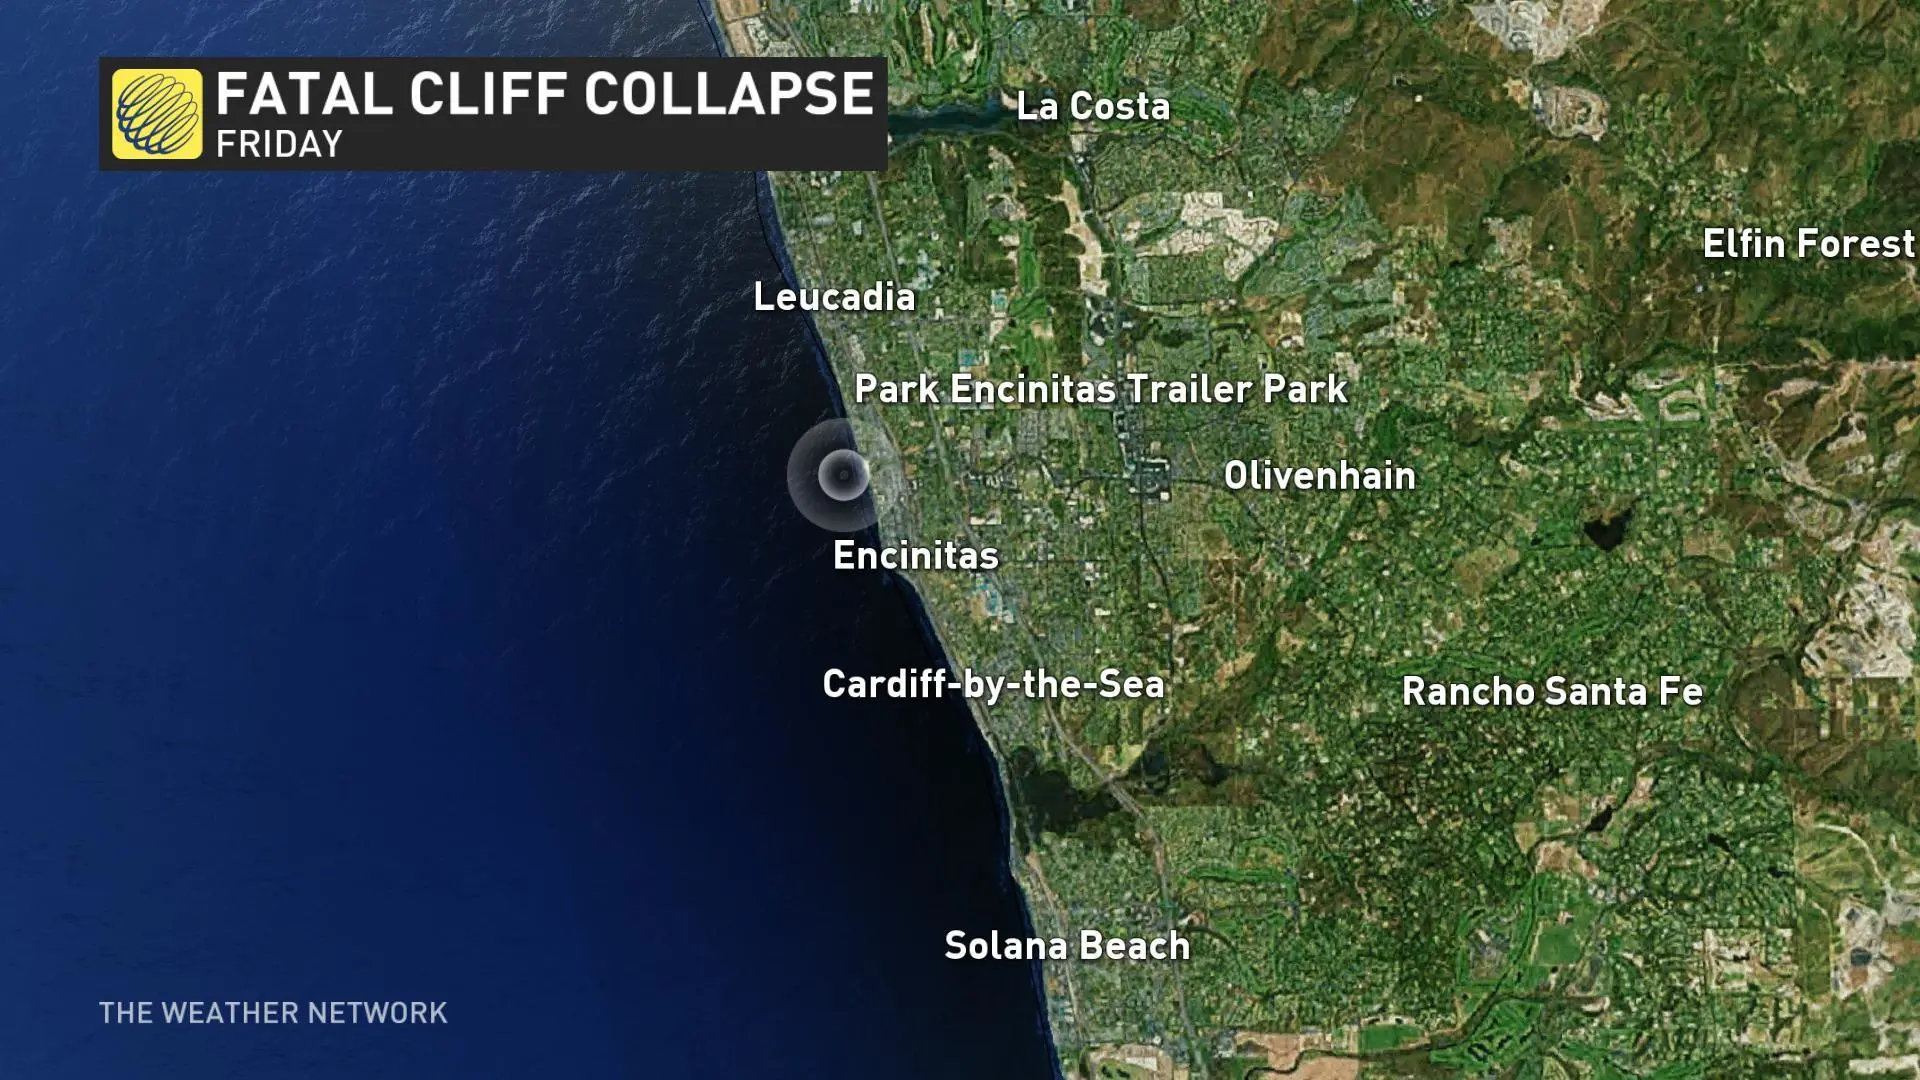 3 killed after cliff collapses on California beach near San Diego